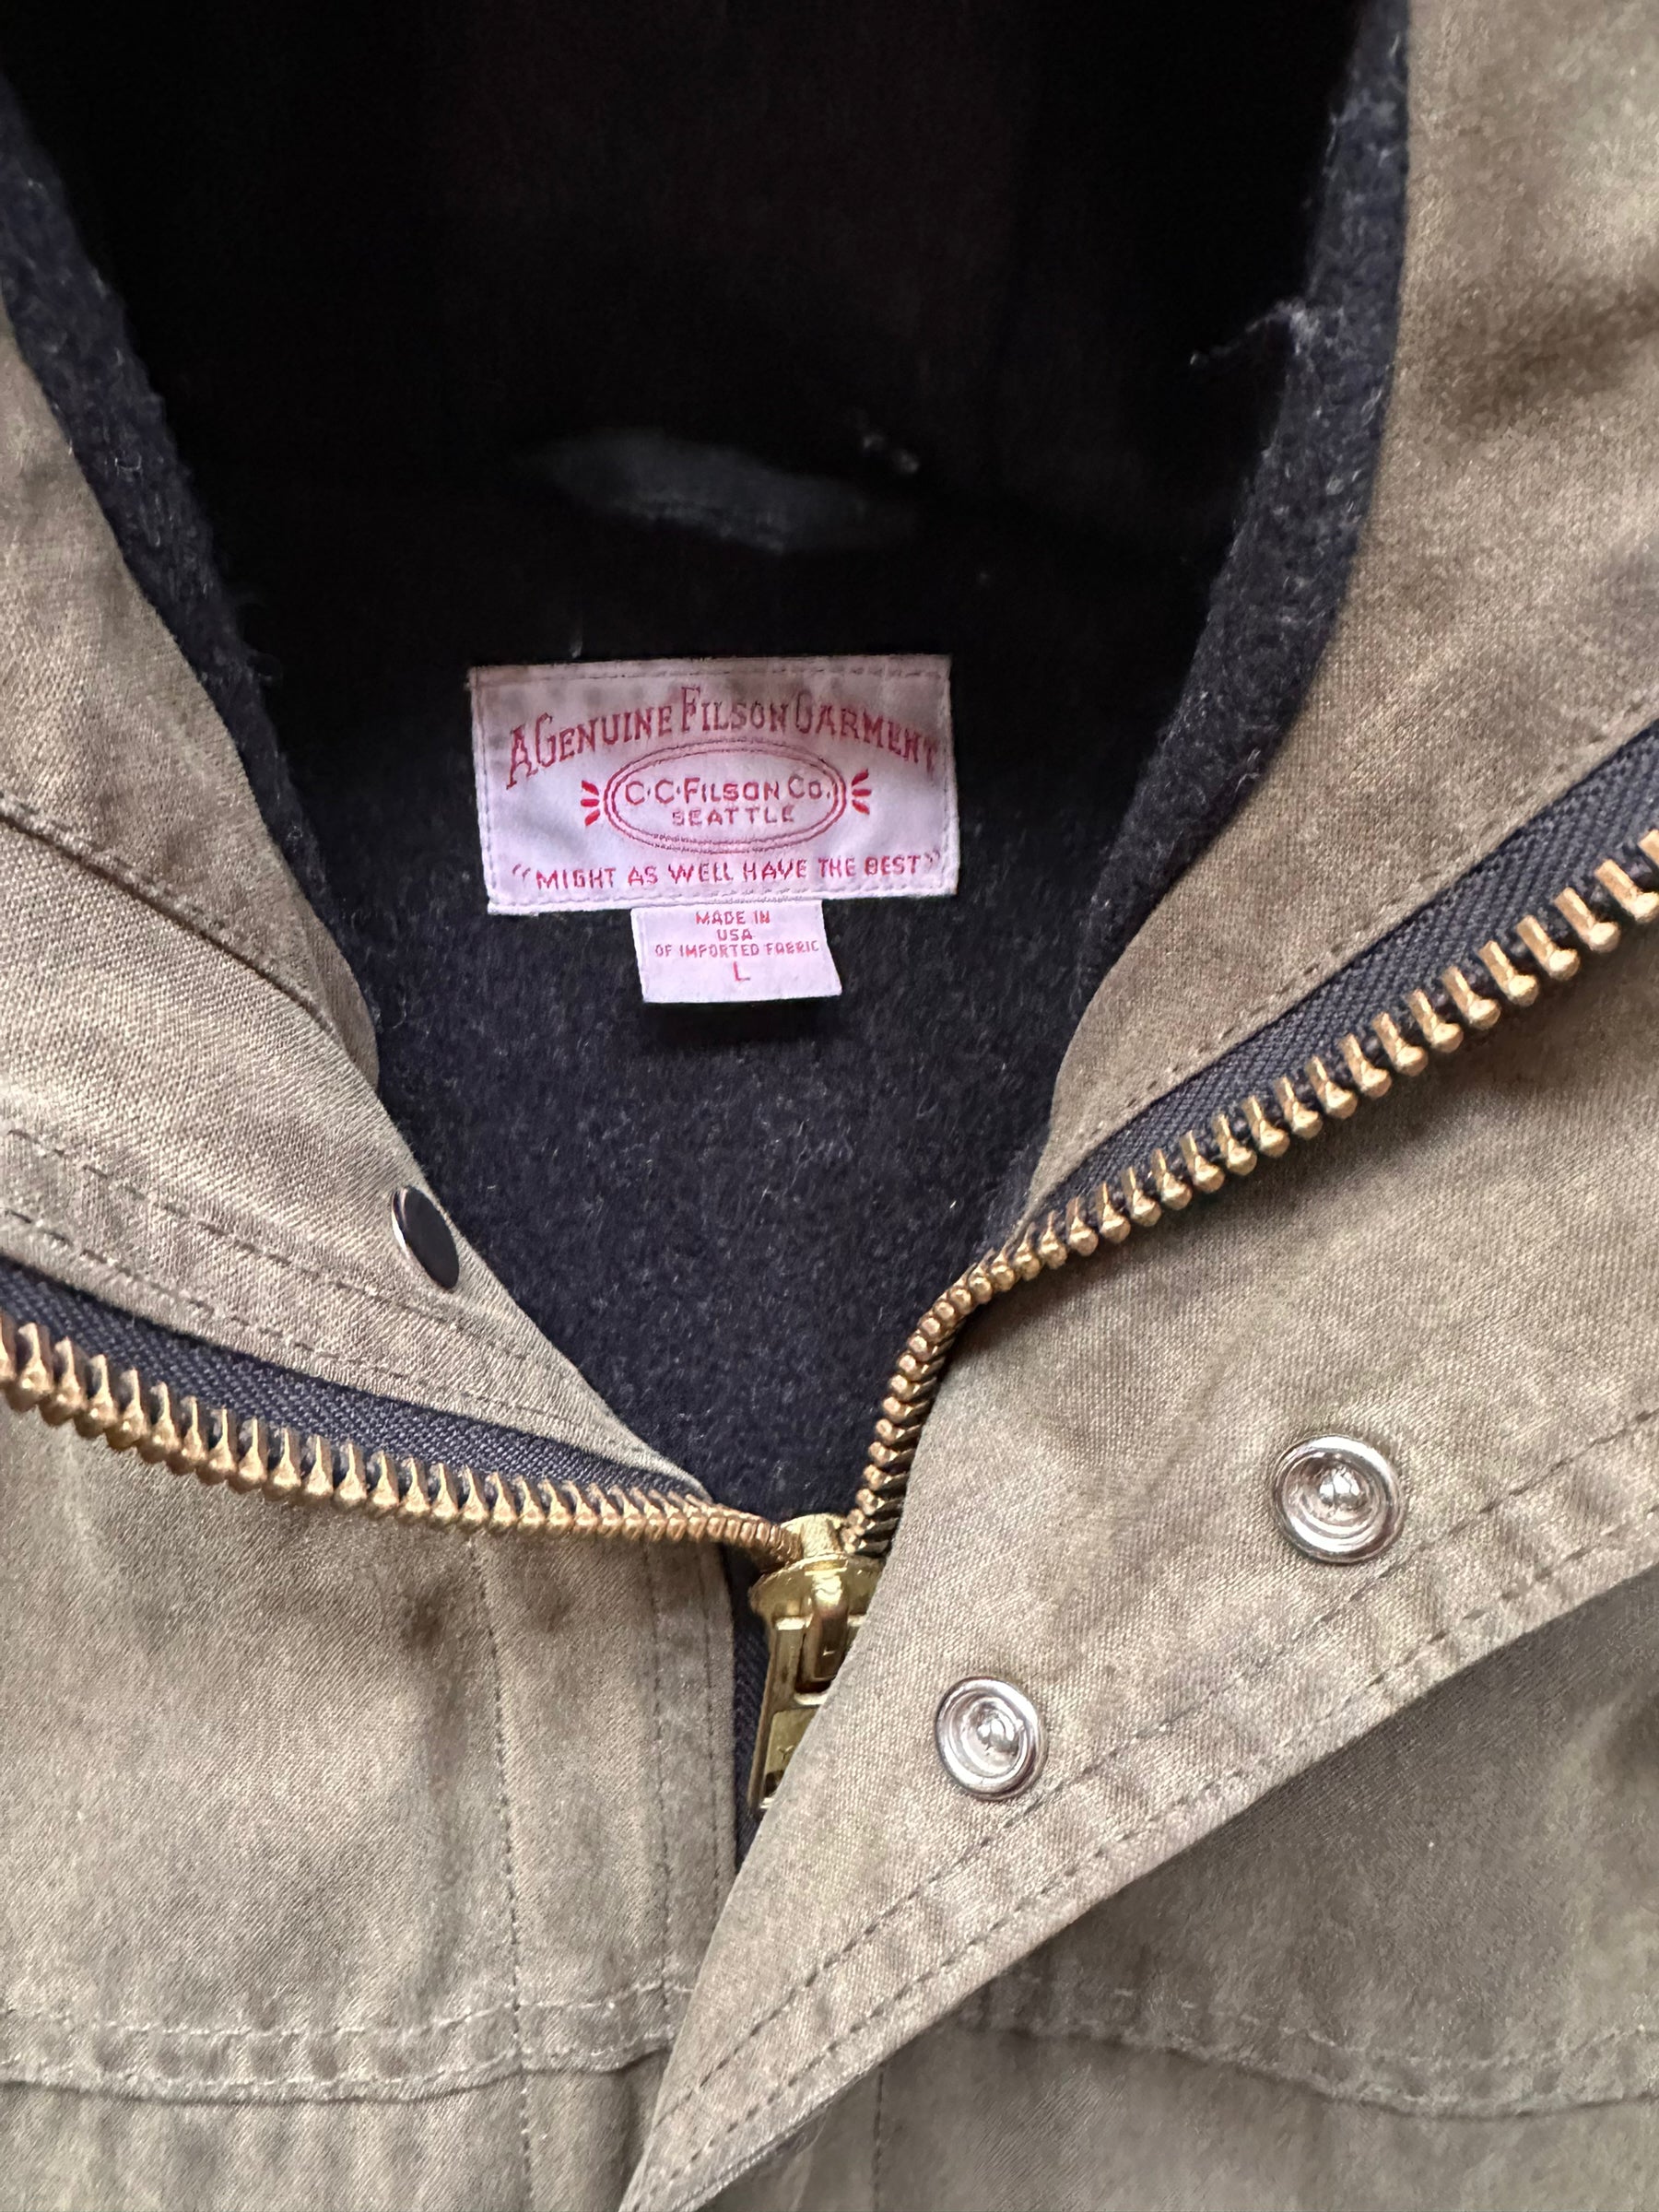 Tag View of Filson Foothills Parka SZ L |  Filson Tin Cloth Jackets Seattle | Barn Owl Vintage Clothing Seattle